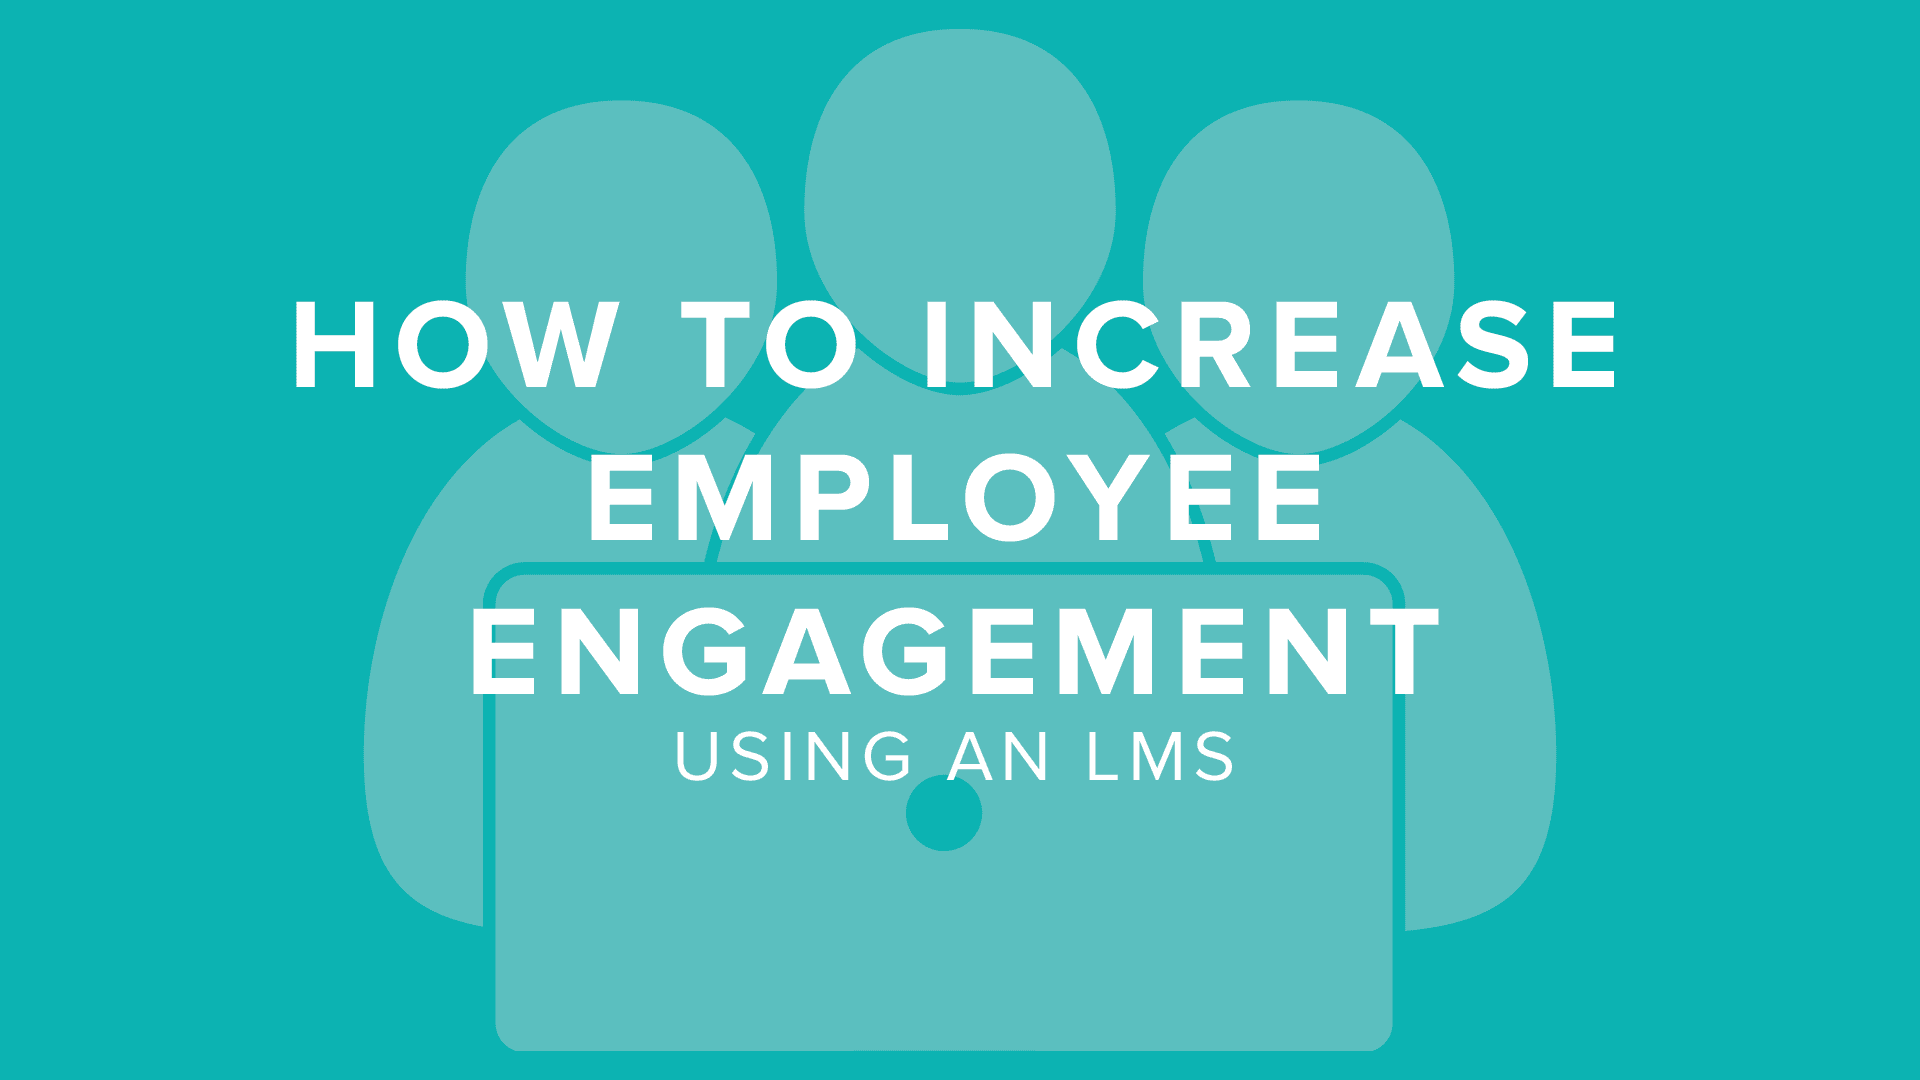 How to Increase Employee Engagement Using an LMS | DigitalChalk